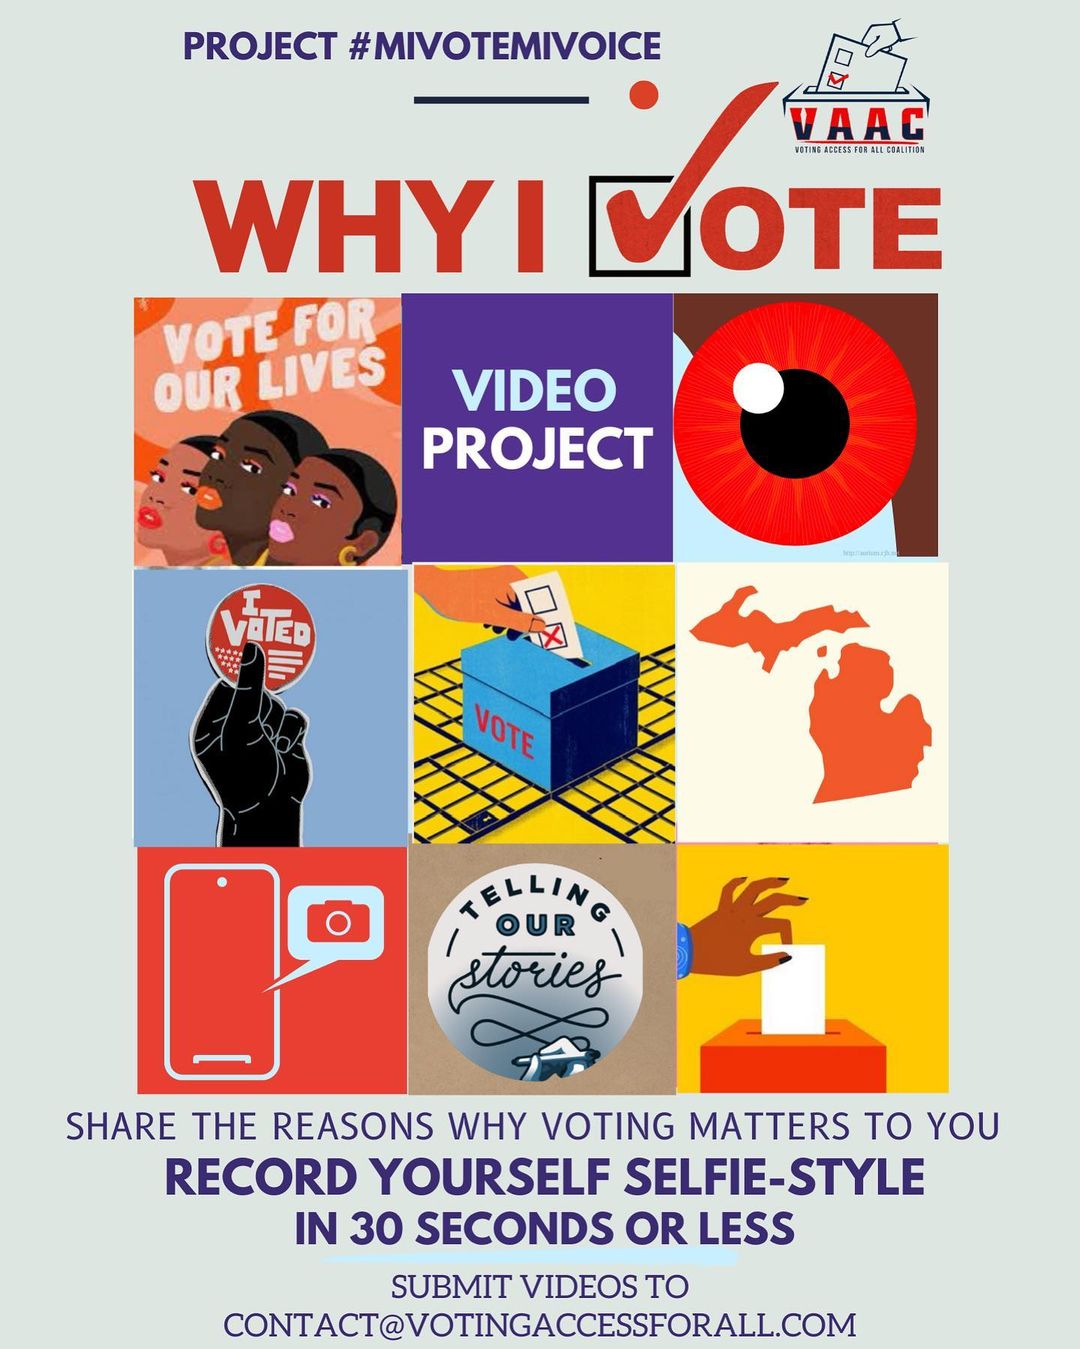 New “Why I Vote” Project